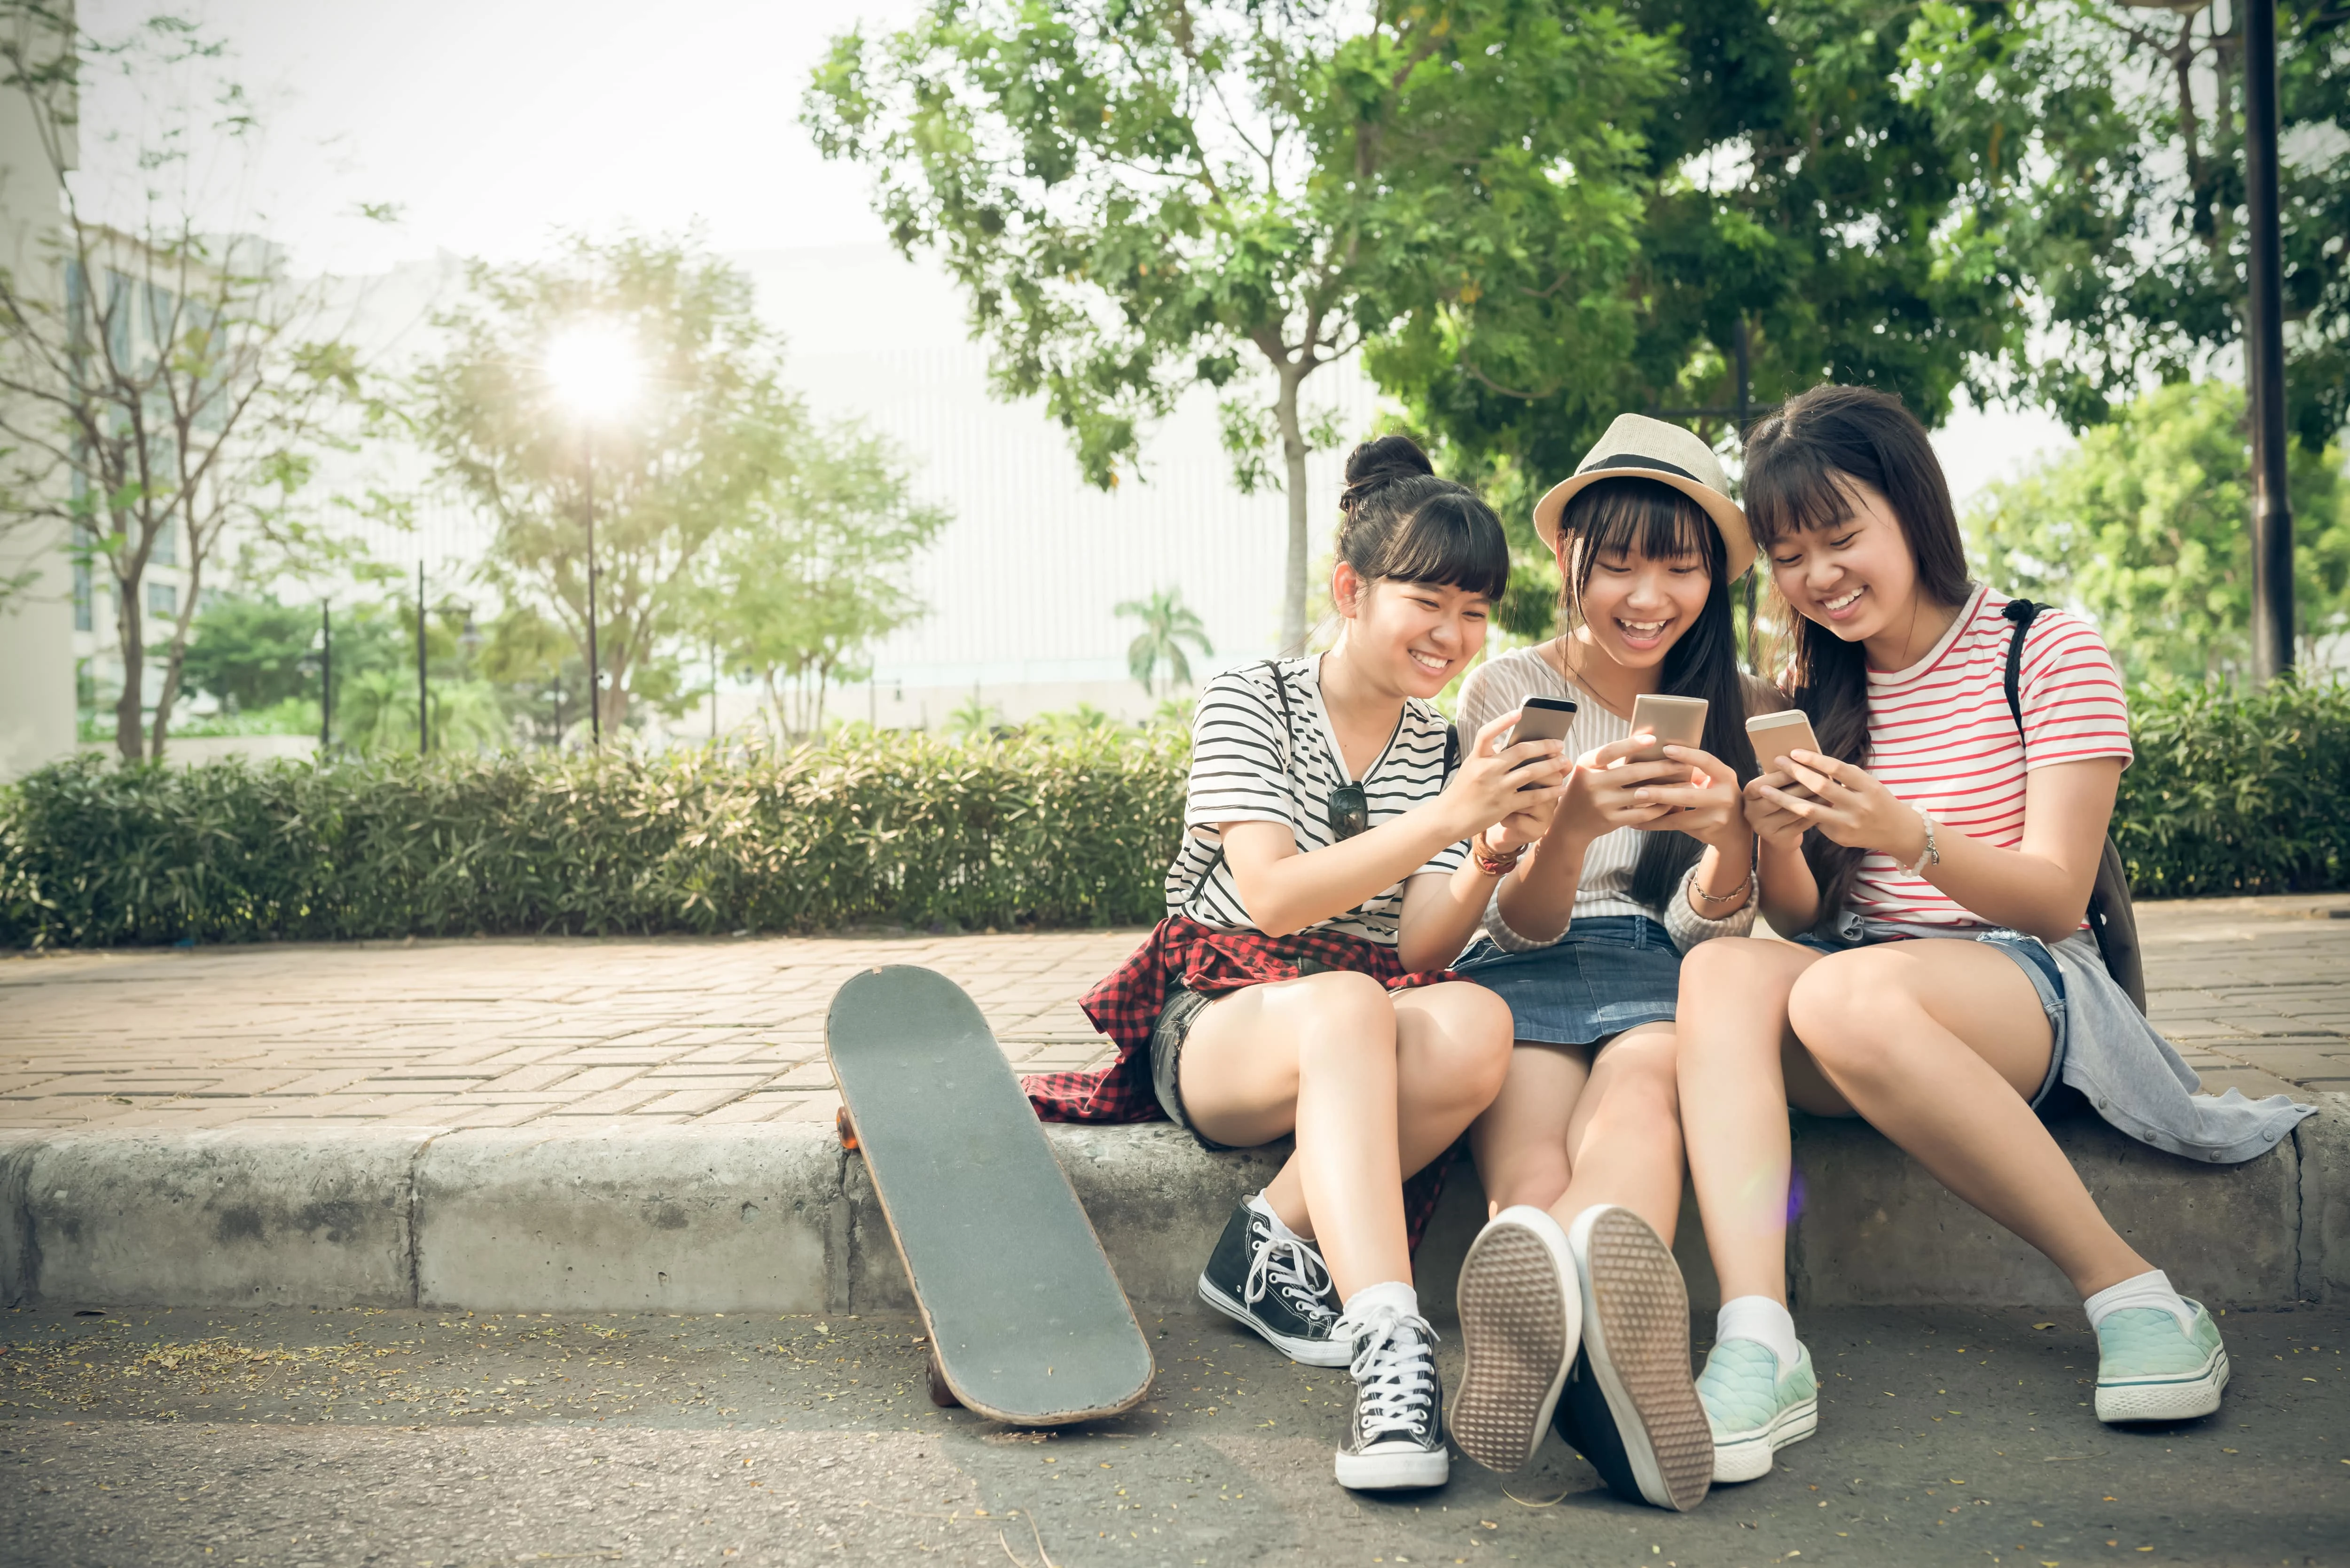 Three girls sitting on a sidewalk and looking at their phones